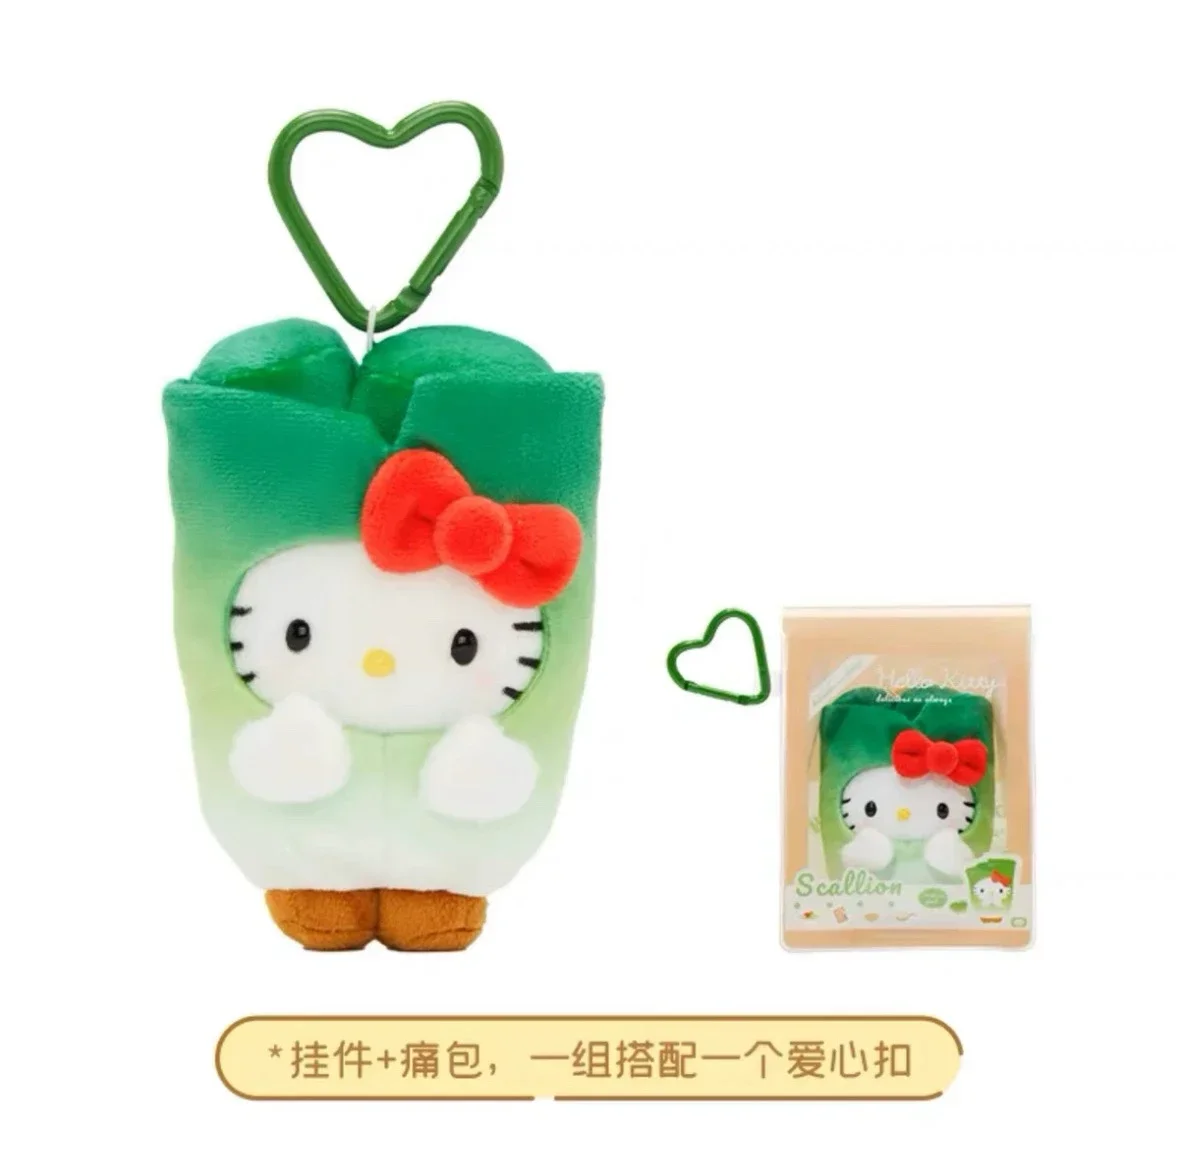 

Kawaii Sanrio Characters Soft Plush Limited Pendant Fruit And Vegetable Series Hellokitty Anime Peripheral Surprise Toy Gifts